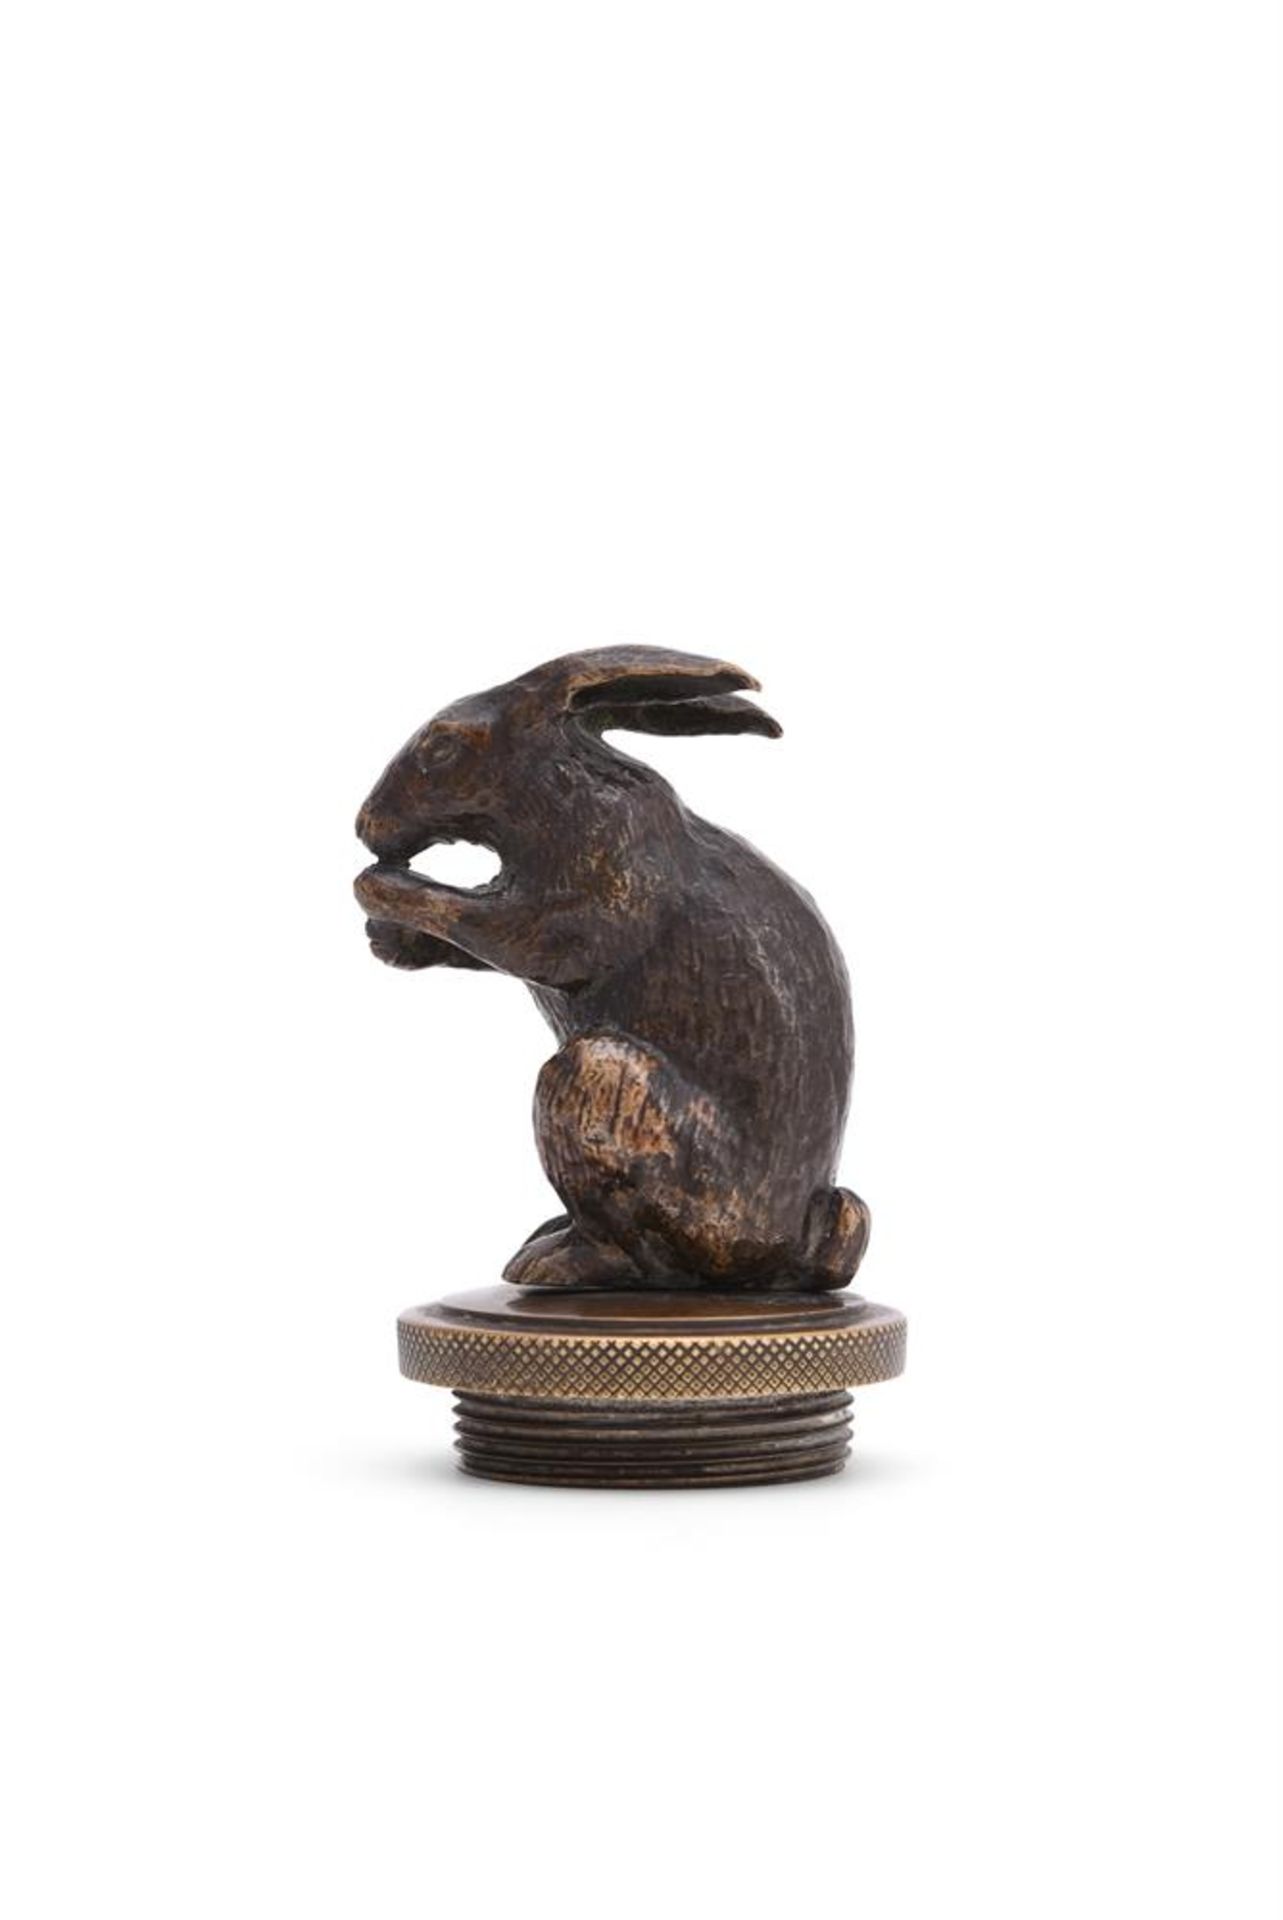 FRENCH SCHOOL, A BRONZE RADIATOR CAP MODELLED AS A STANDING RABBIT